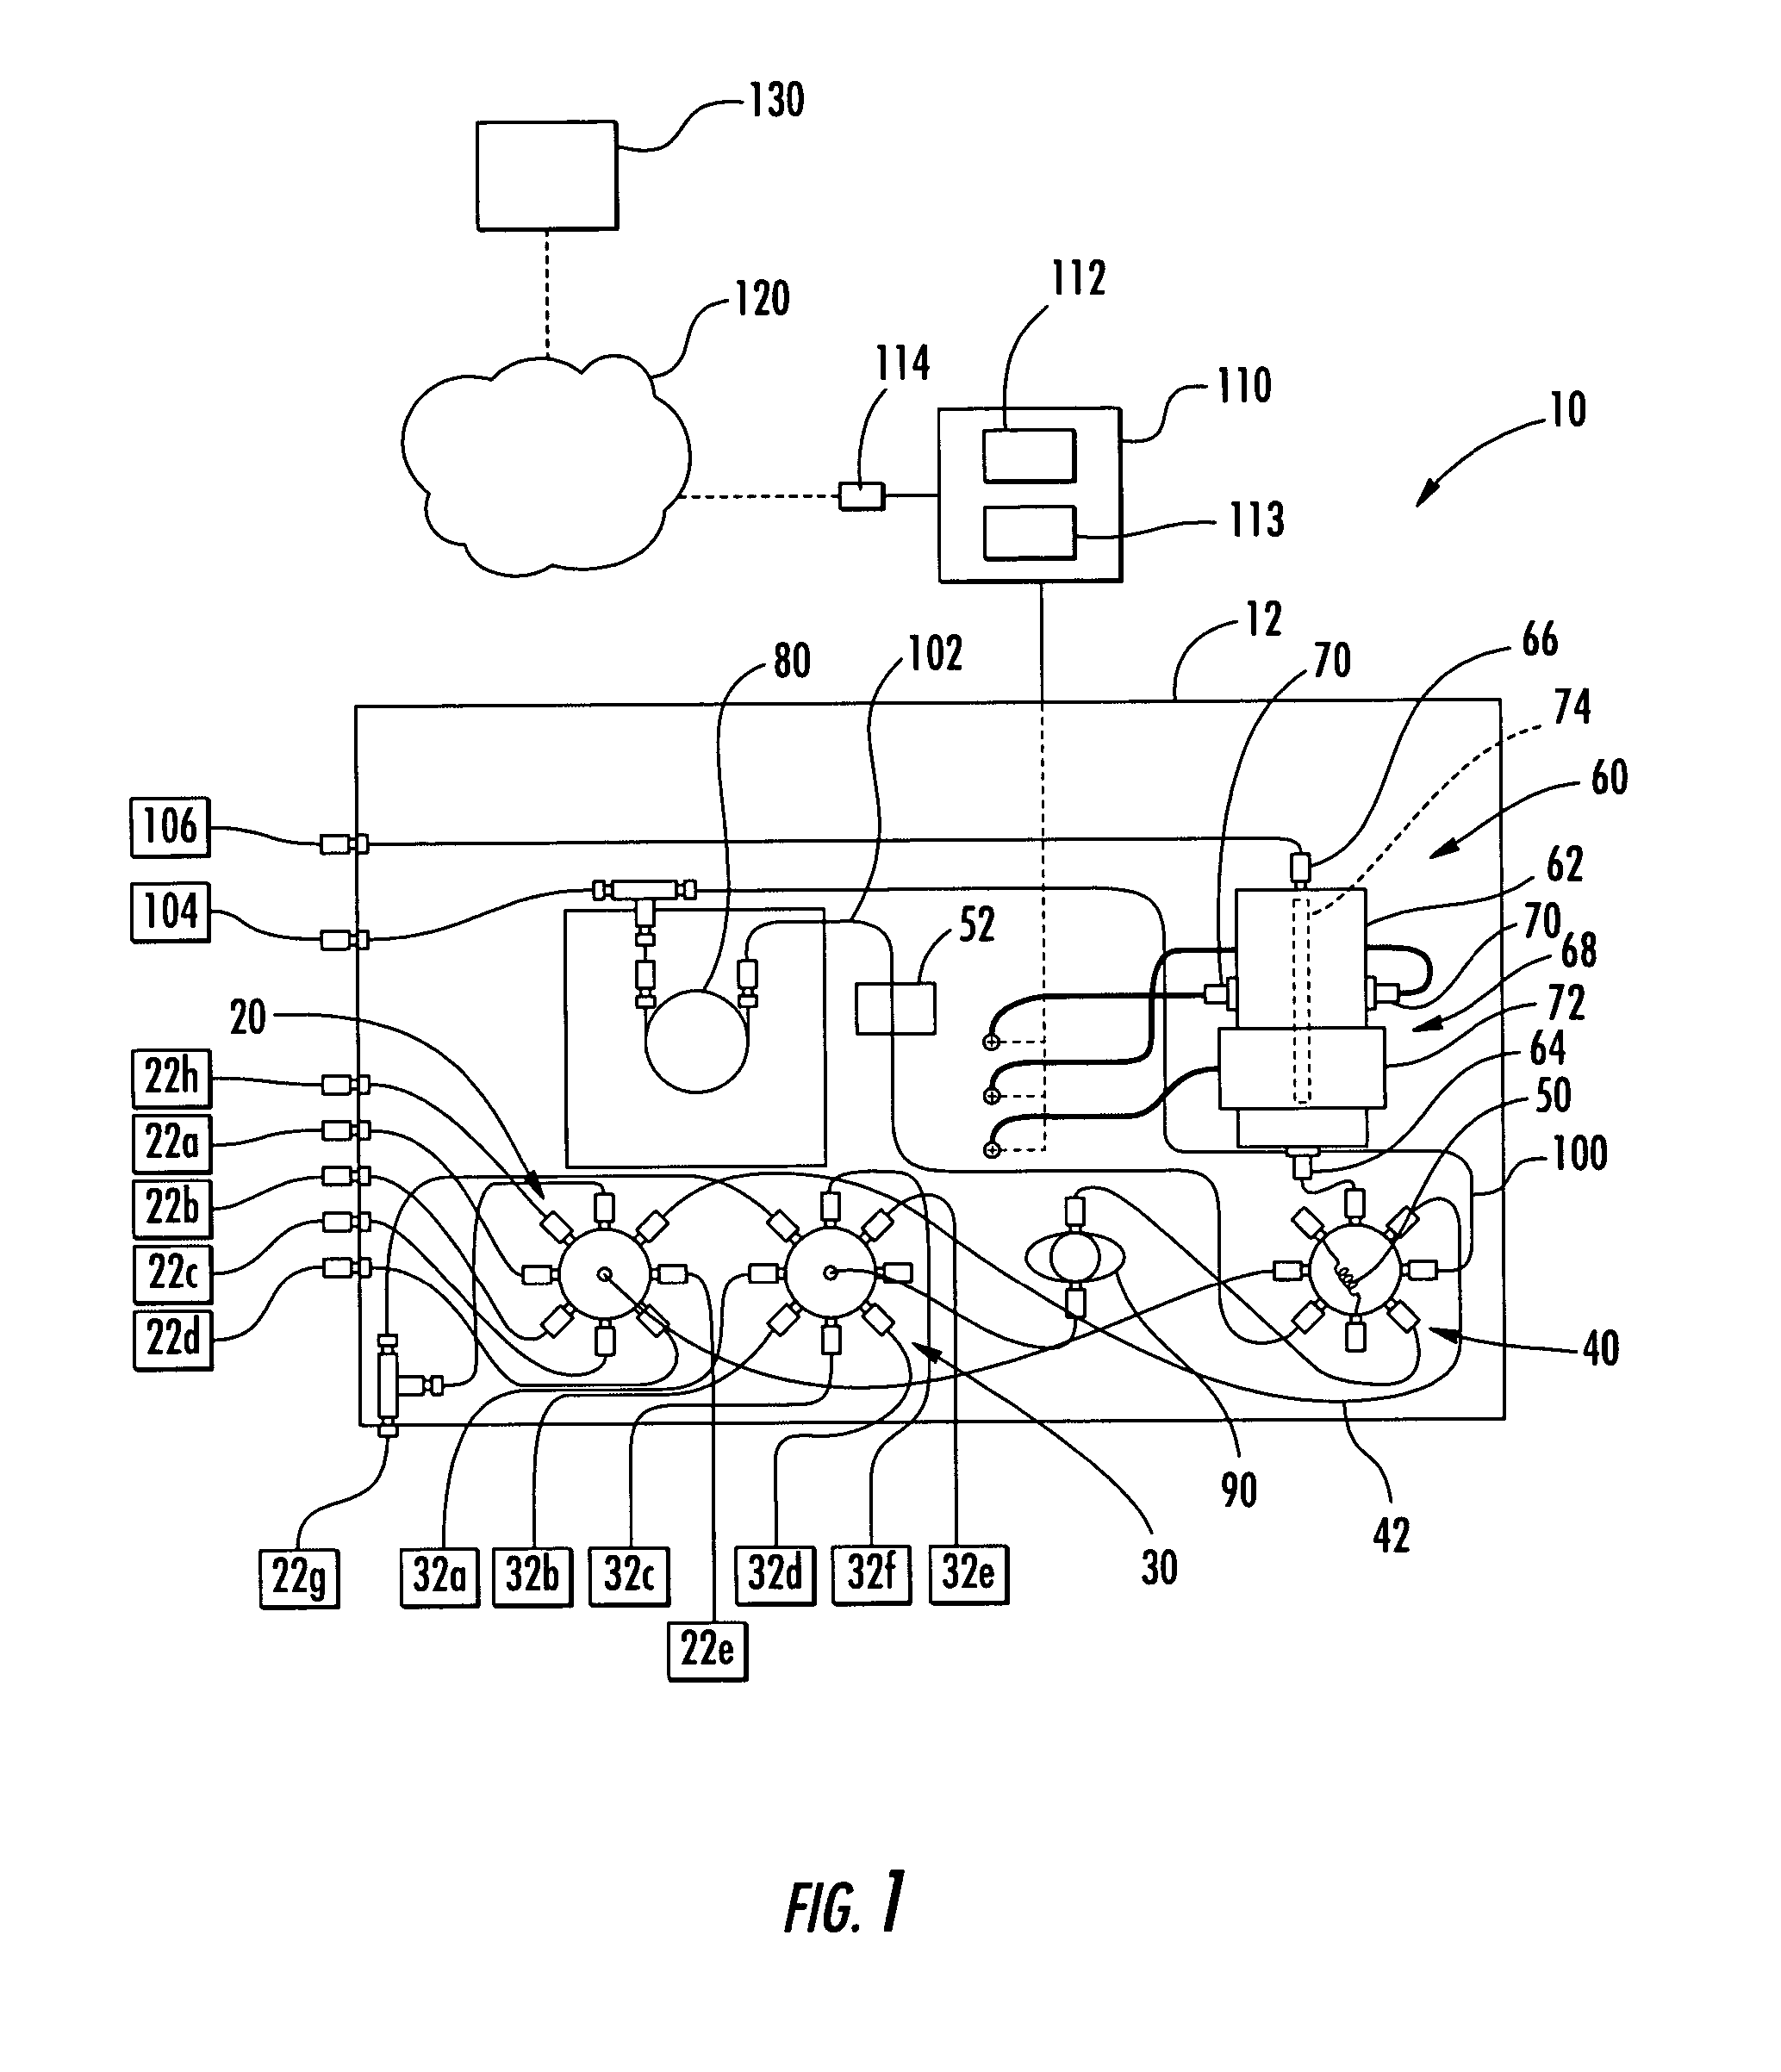 Apparatus and method for chemical analysis